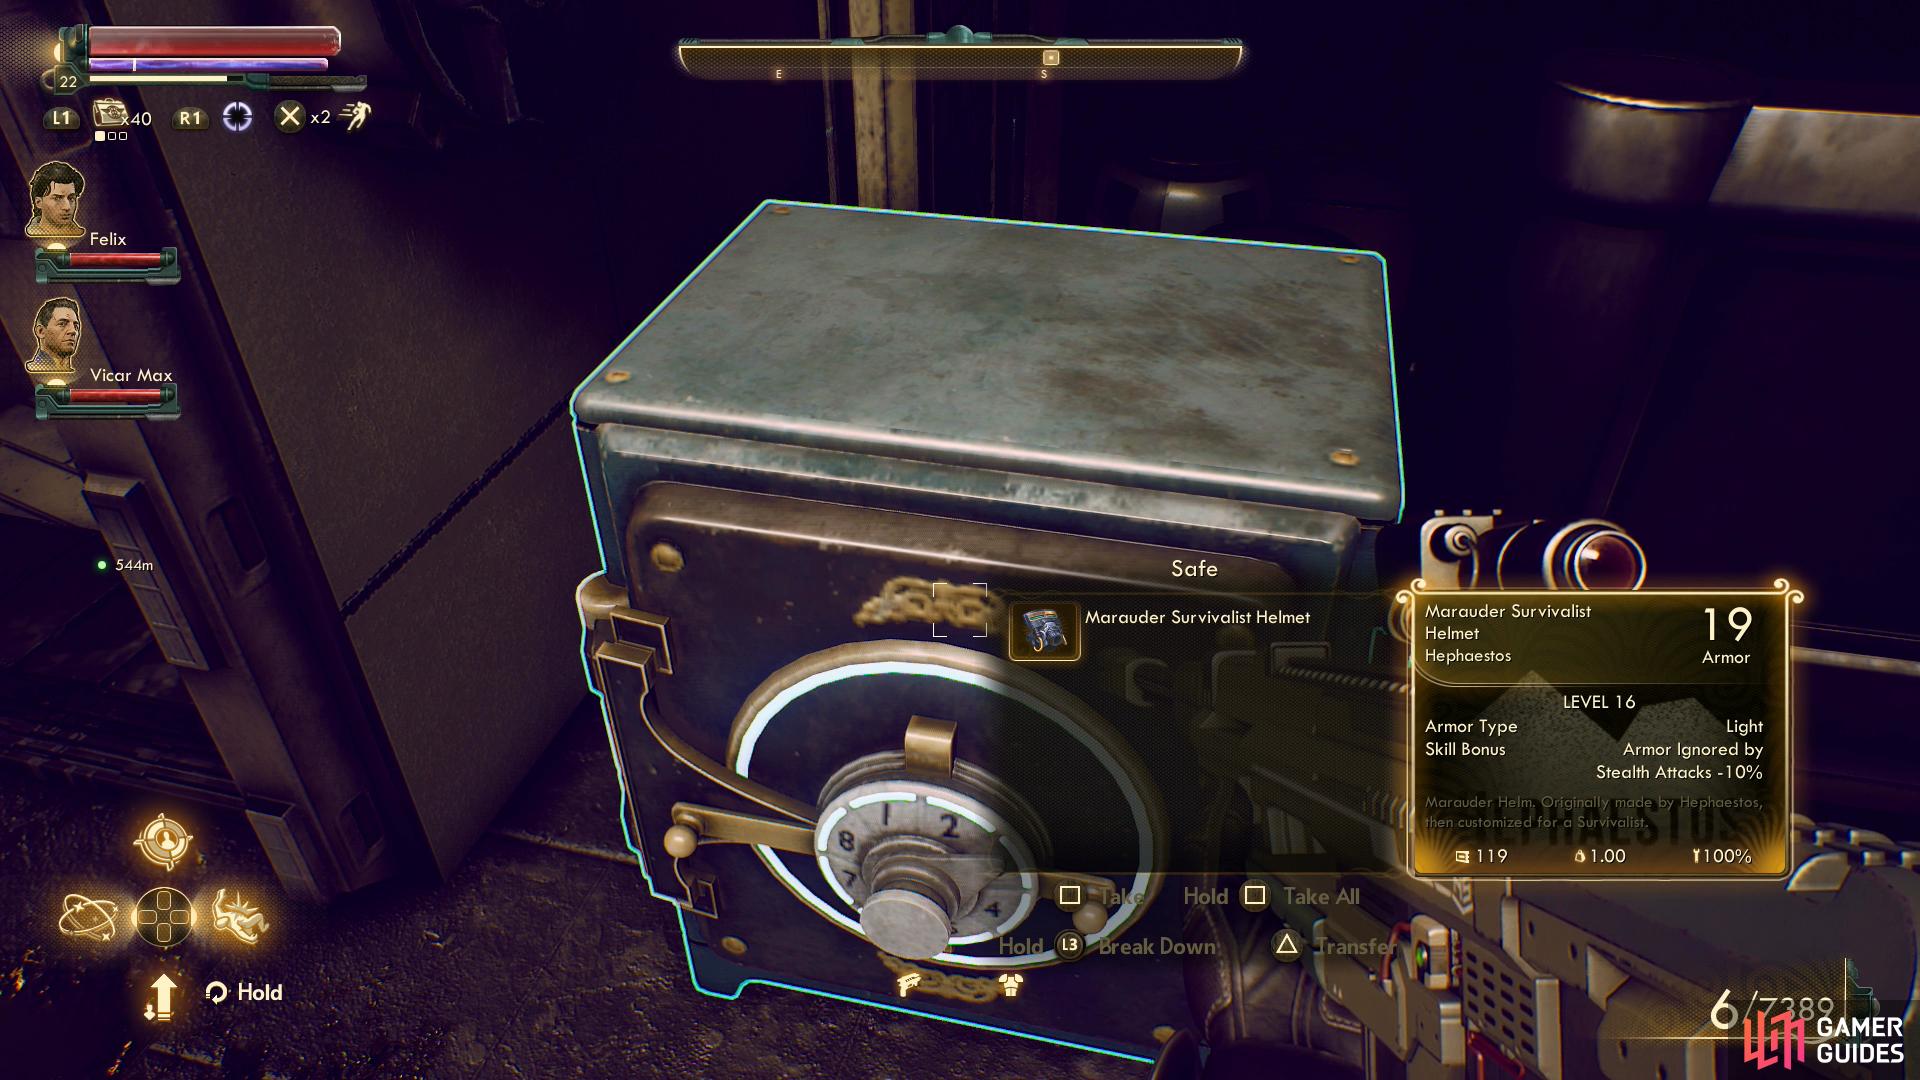 Loot a safe in the second floor of the pub to find the Marauder Survivalist Helmet.